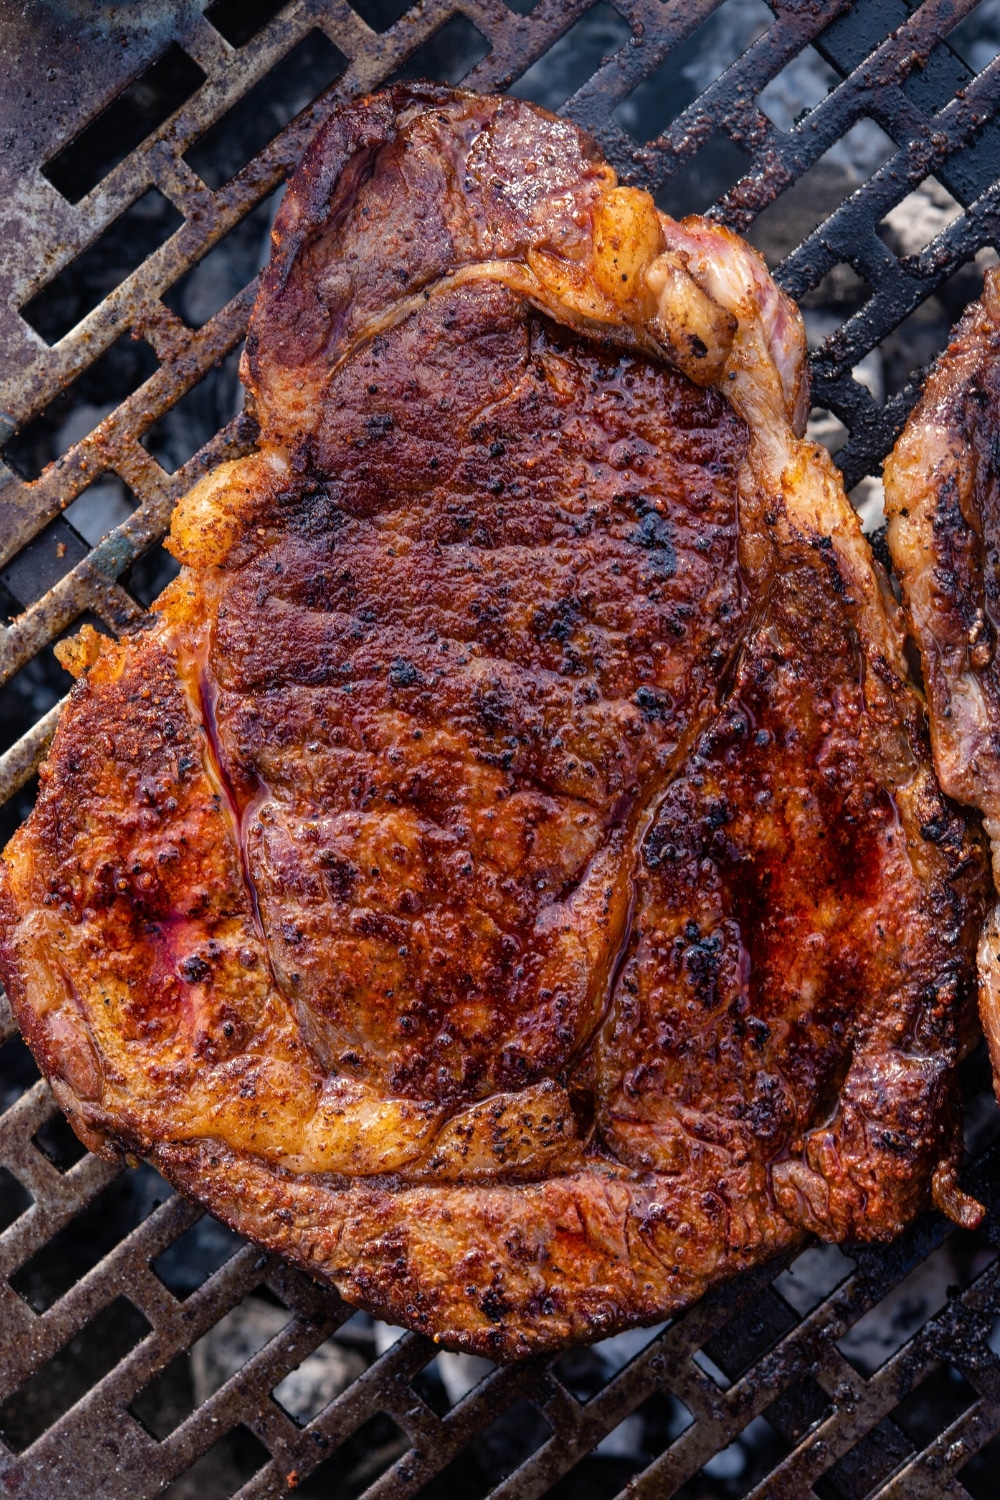 A grilled ribeye steak cooking on a charcoal grill.